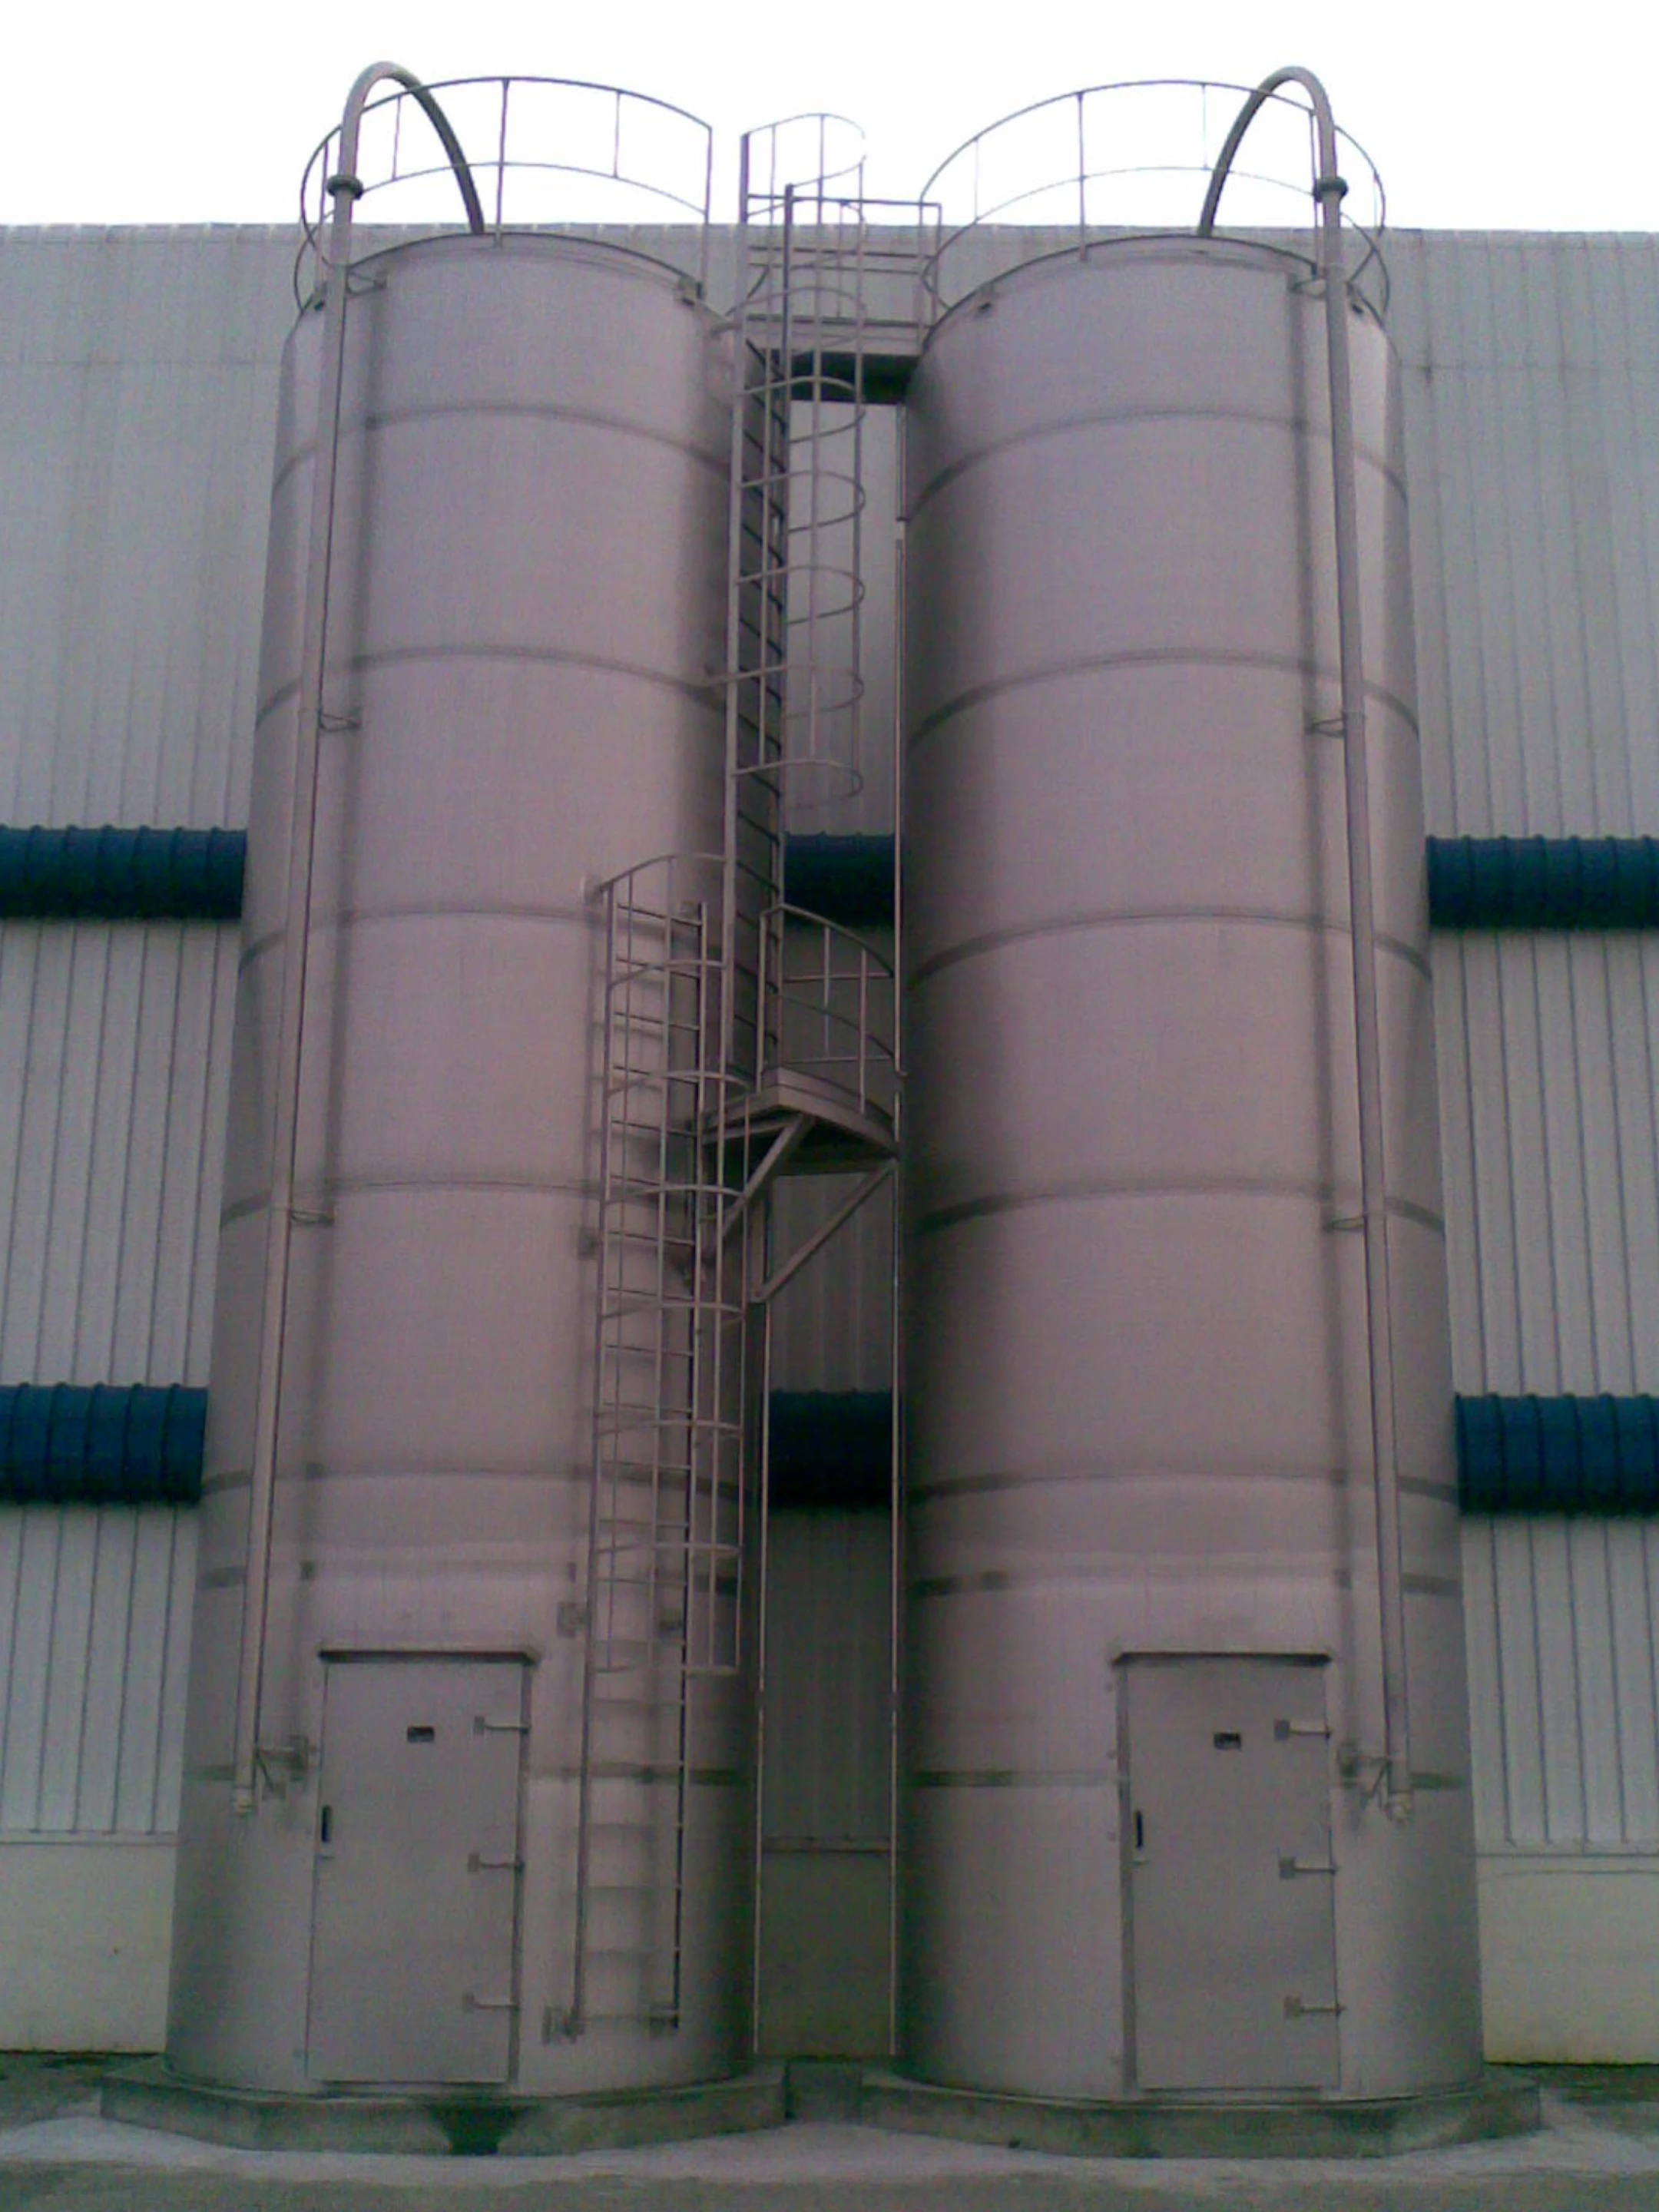 BTL Silos in stainless steel - Pharmaceutical Industry – Chemical substances